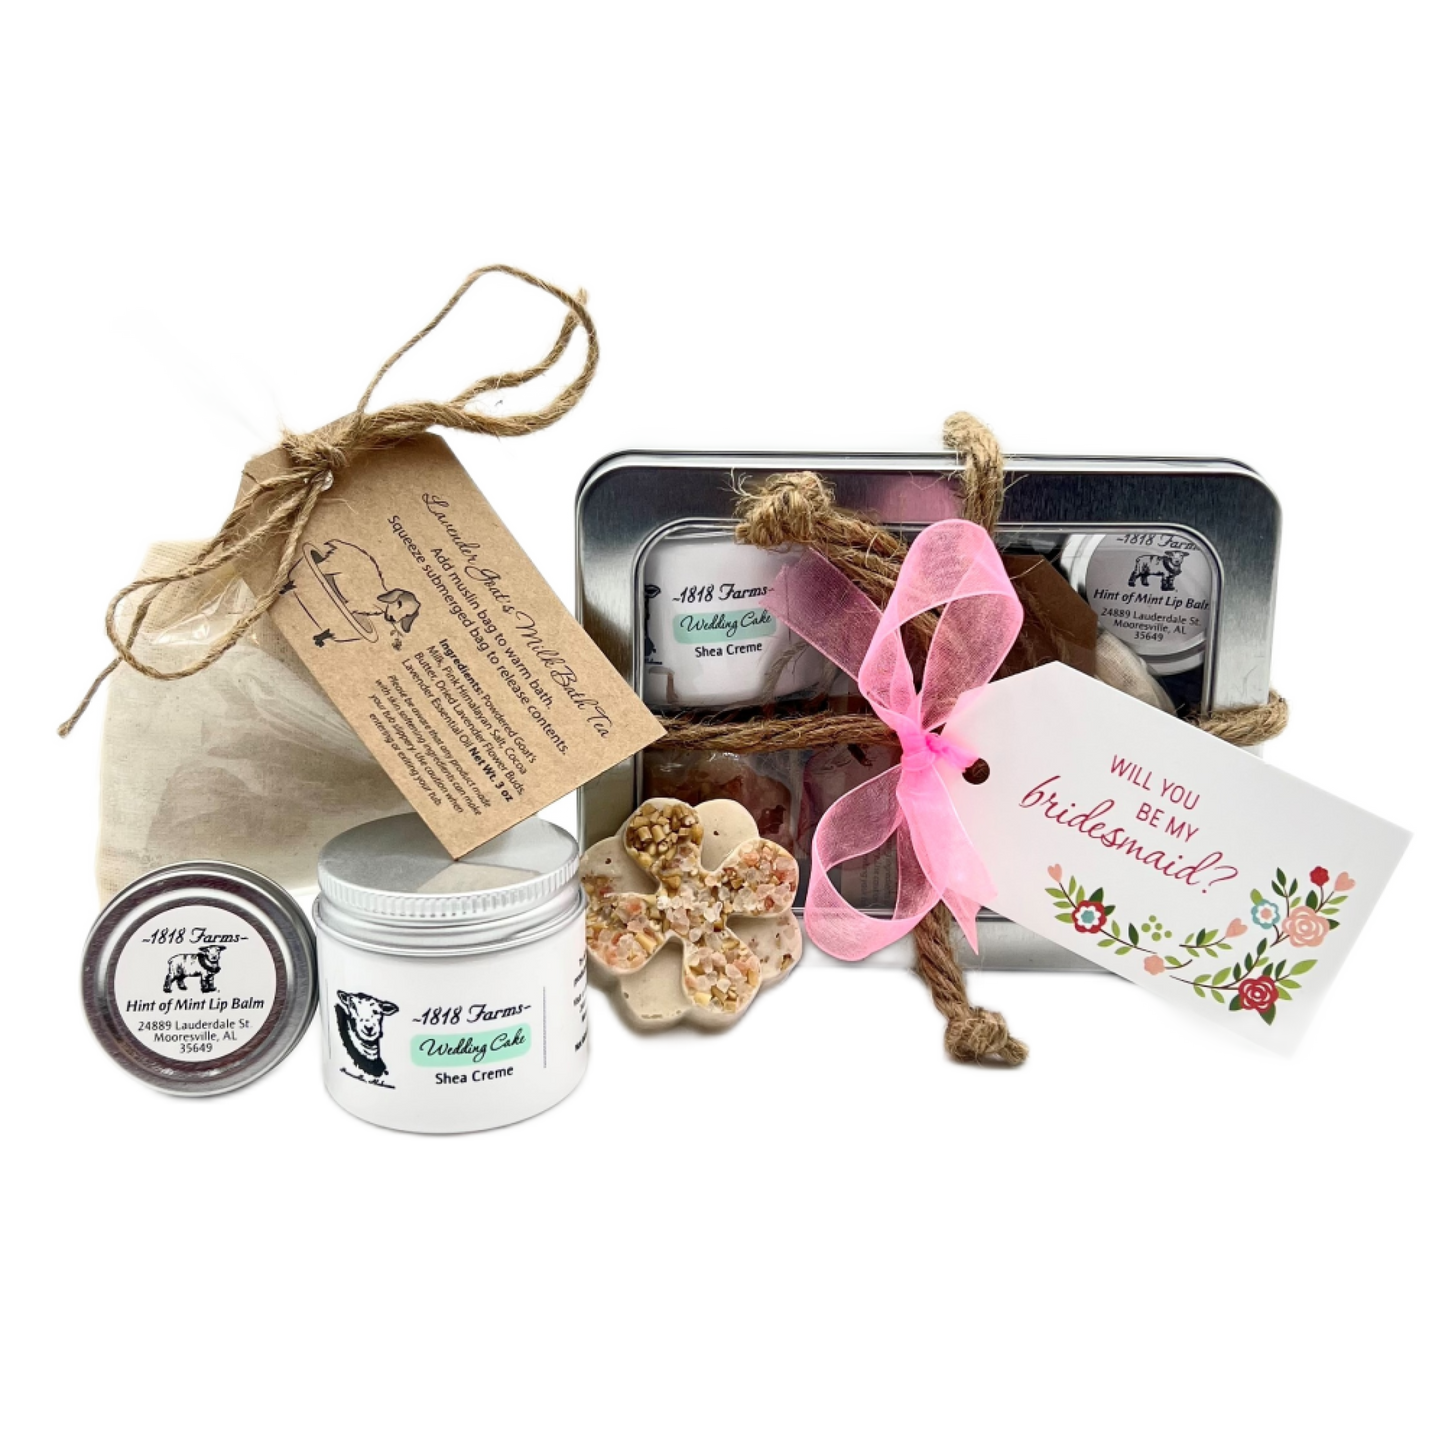 "Will You Be My Bridesmaid?" Skin Softening Gift Set Gift Basket 1818 Farms   